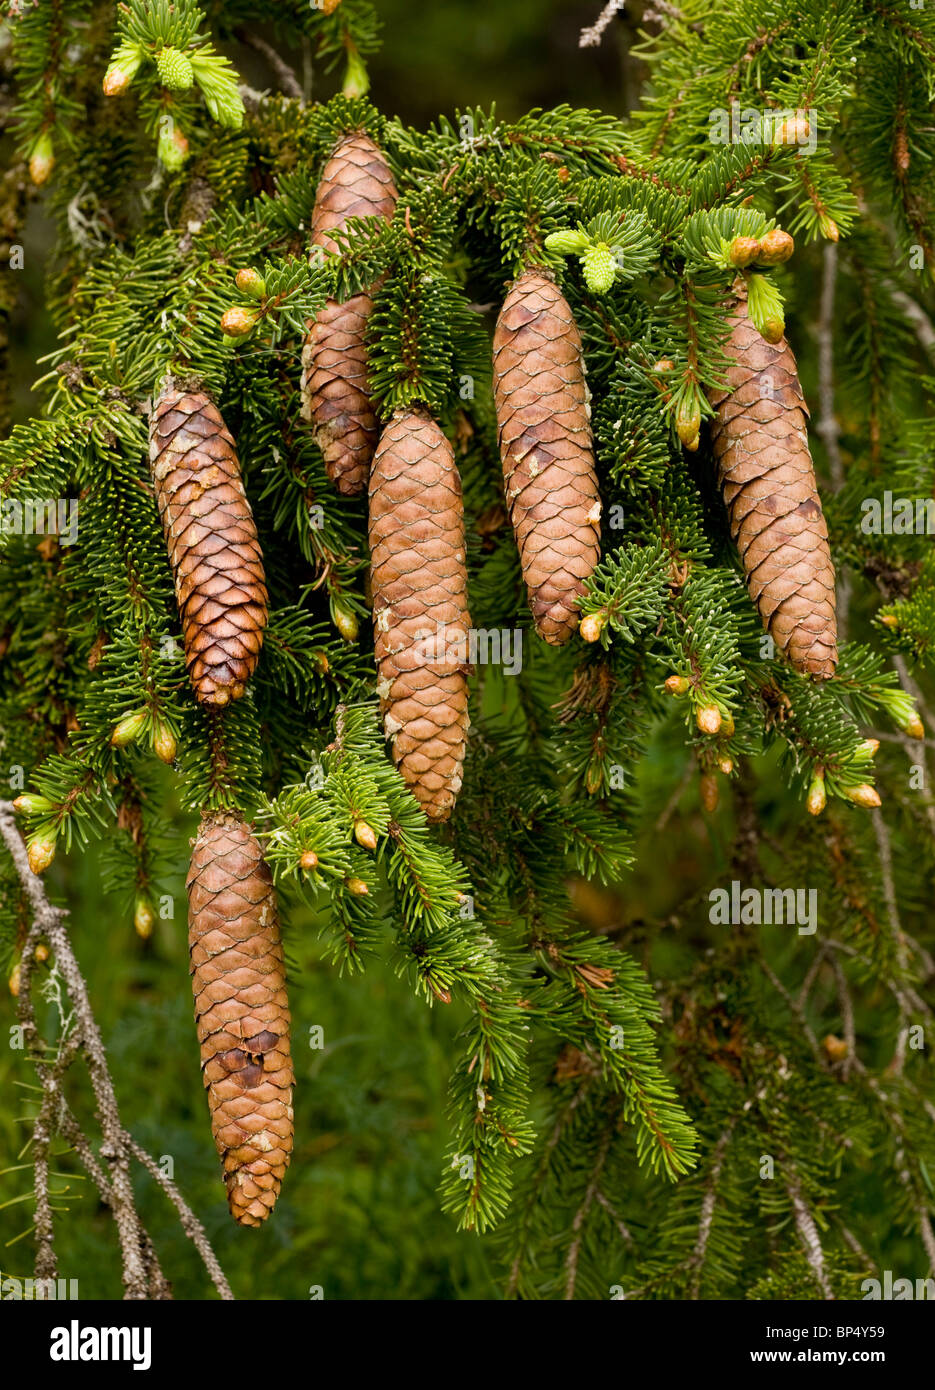 Norway Spruce, Picea abies female cones. Stock Photo